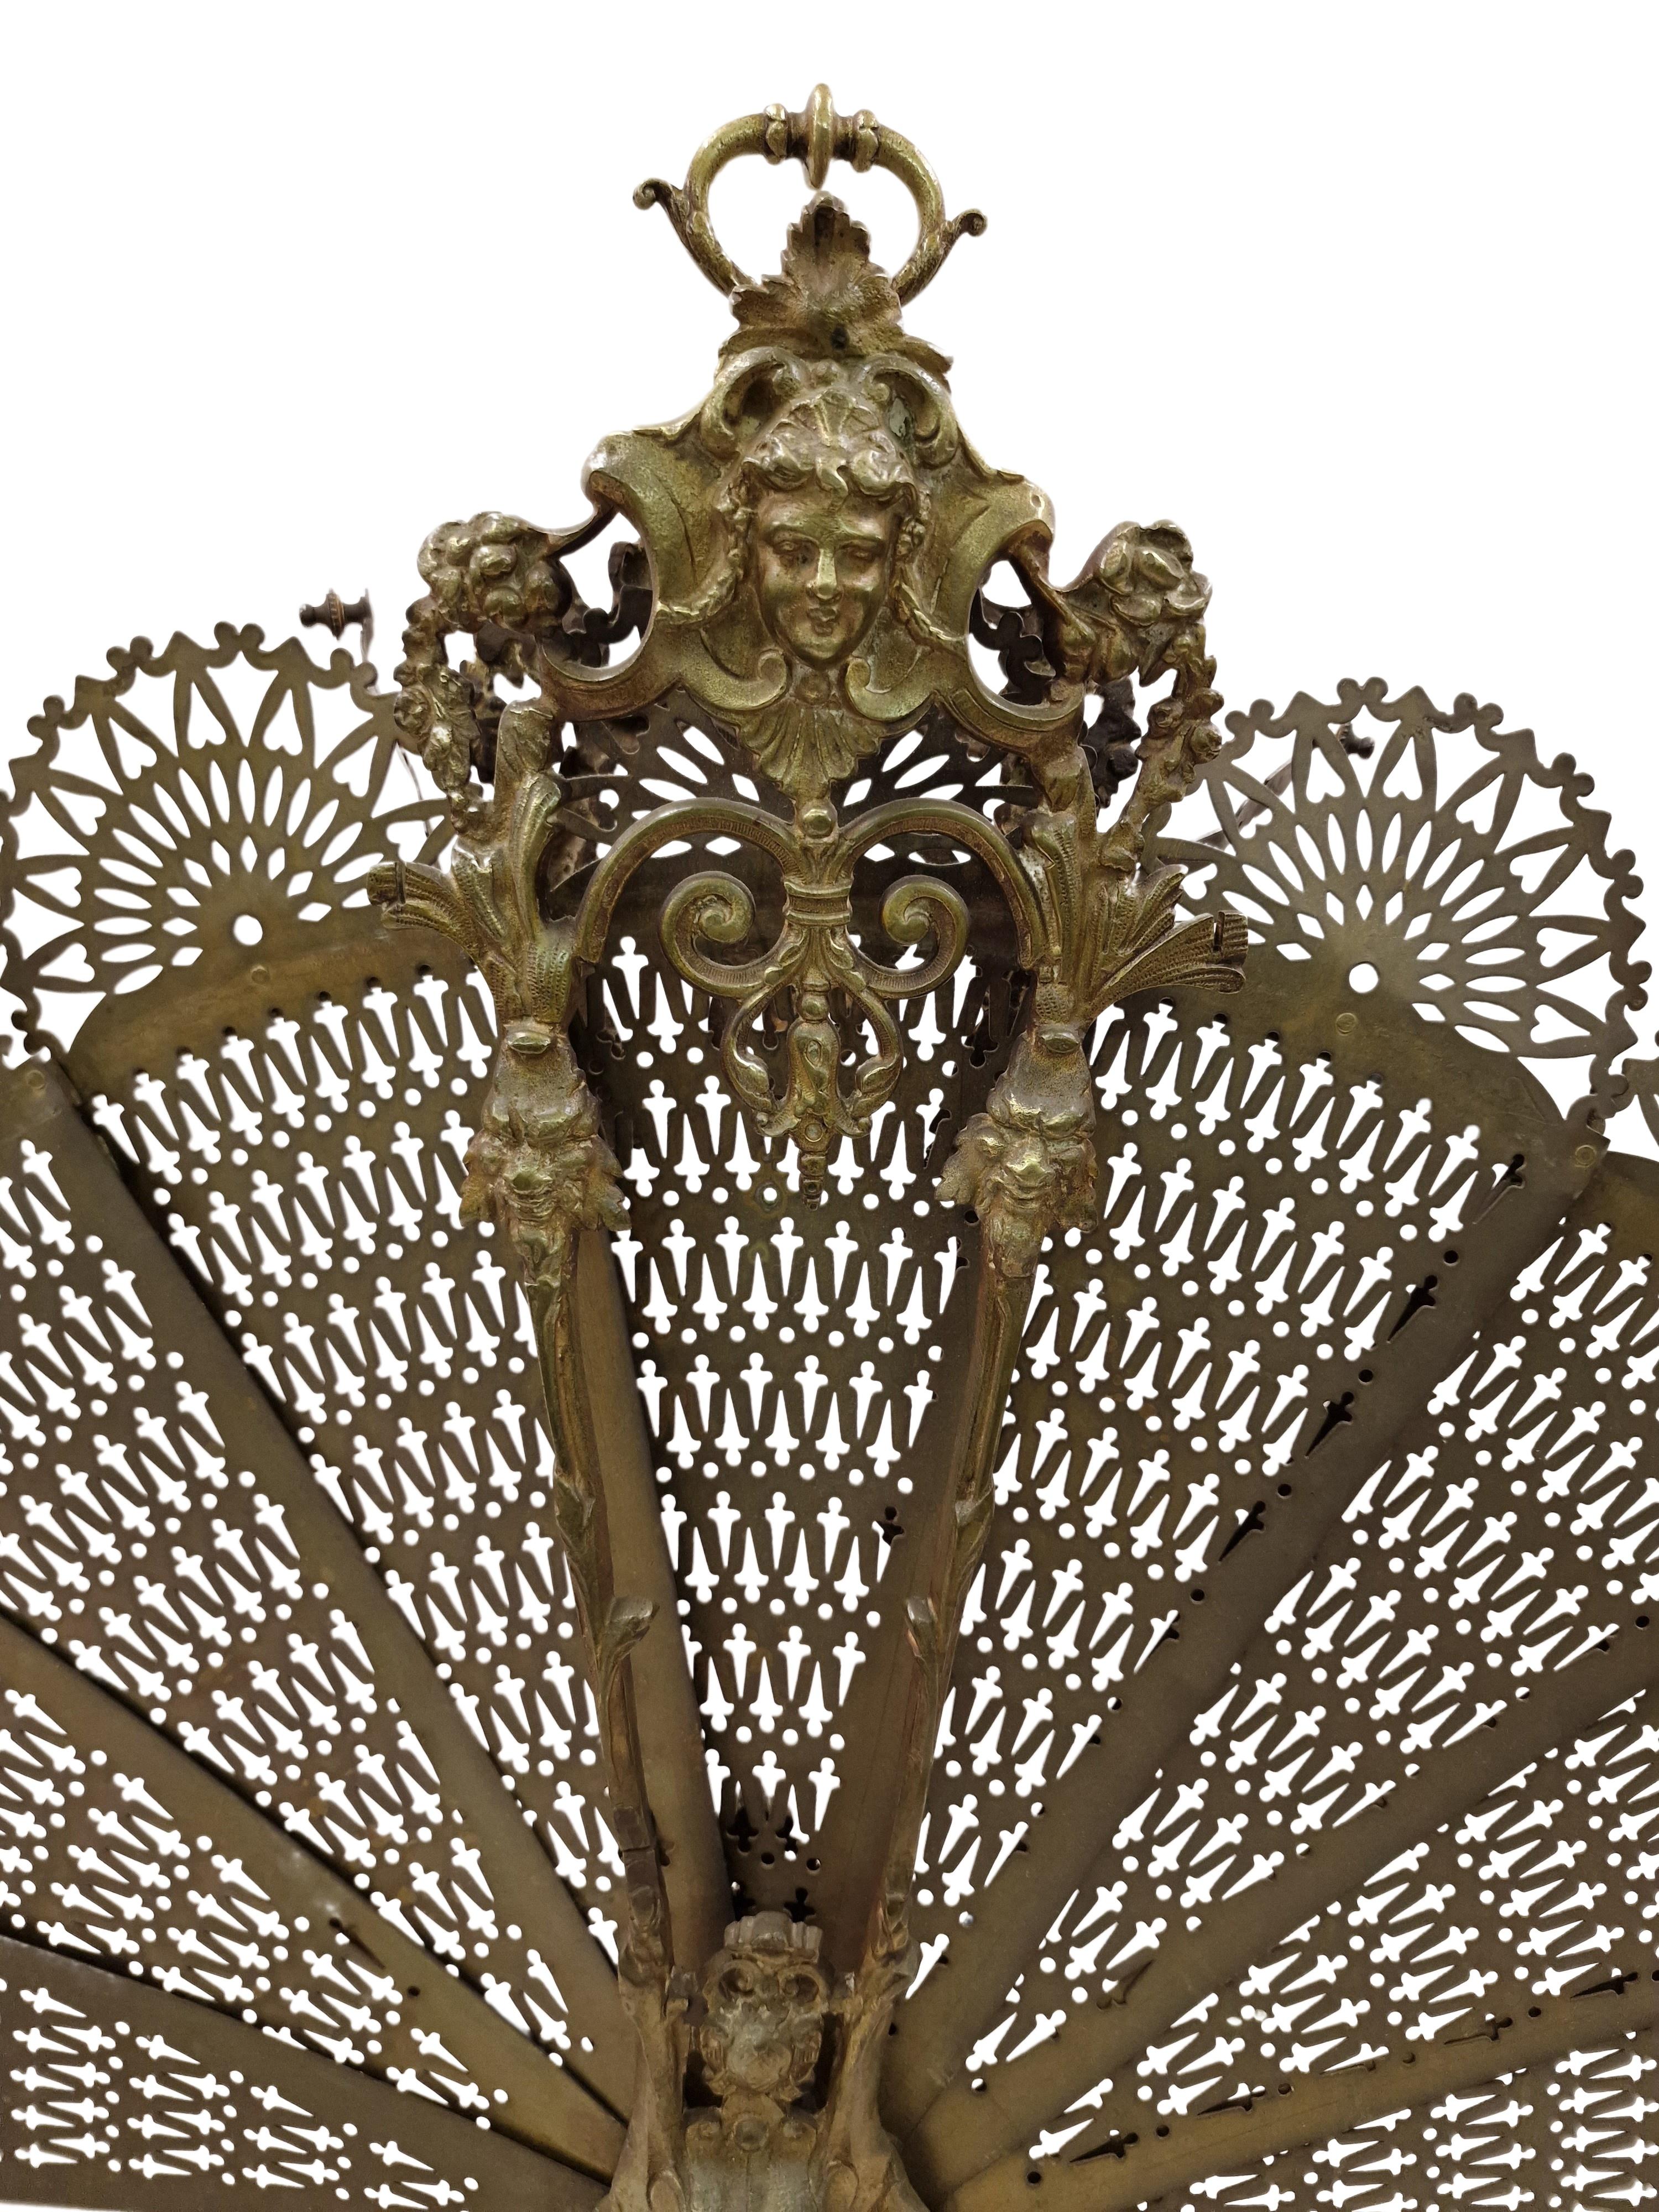 Big Fireplace Screen, Spark Protection, Decoration, solid brass, ~1890, France 2